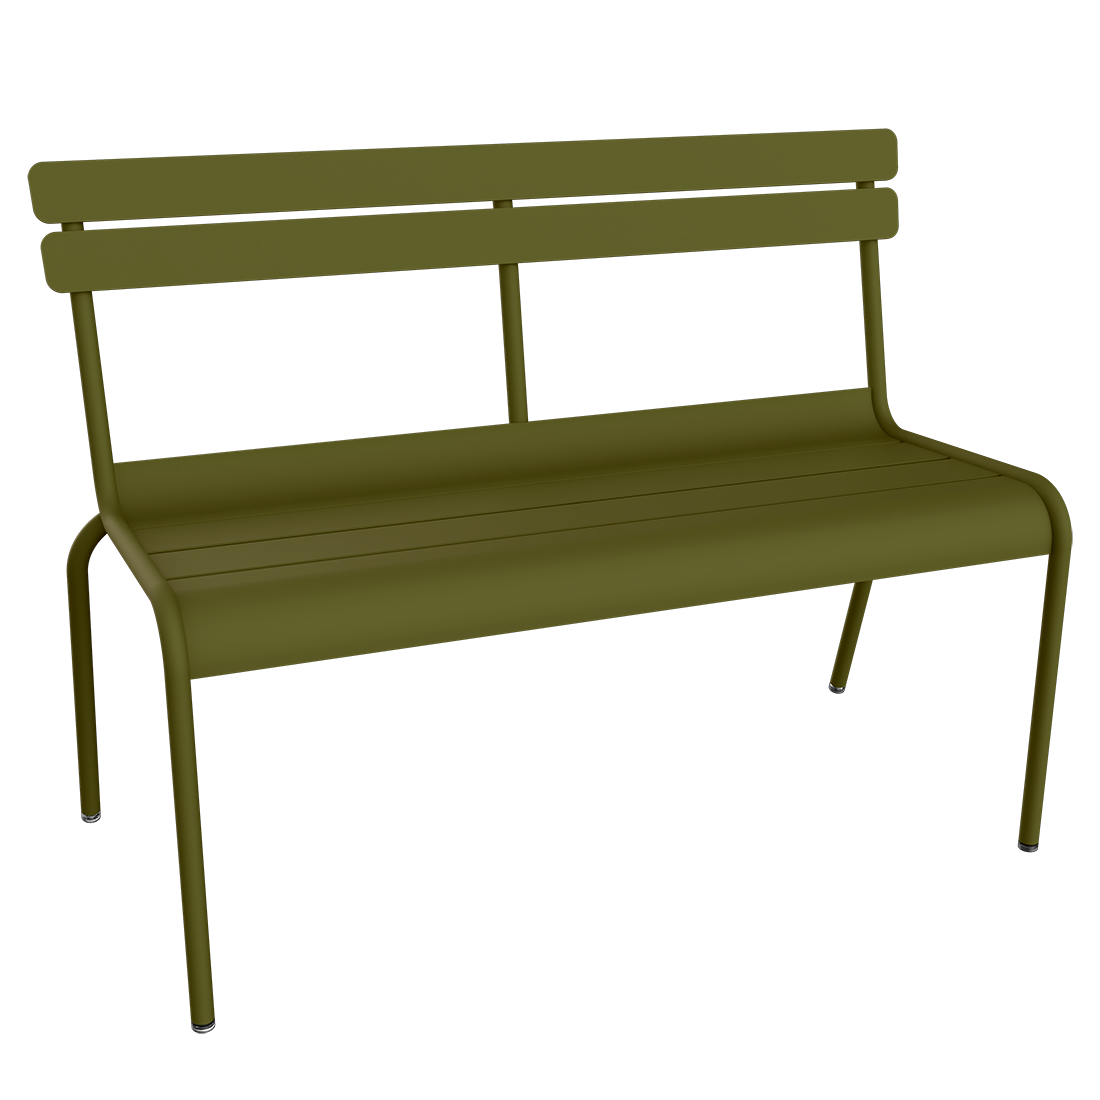 LUXEMBOURG bench with backrest